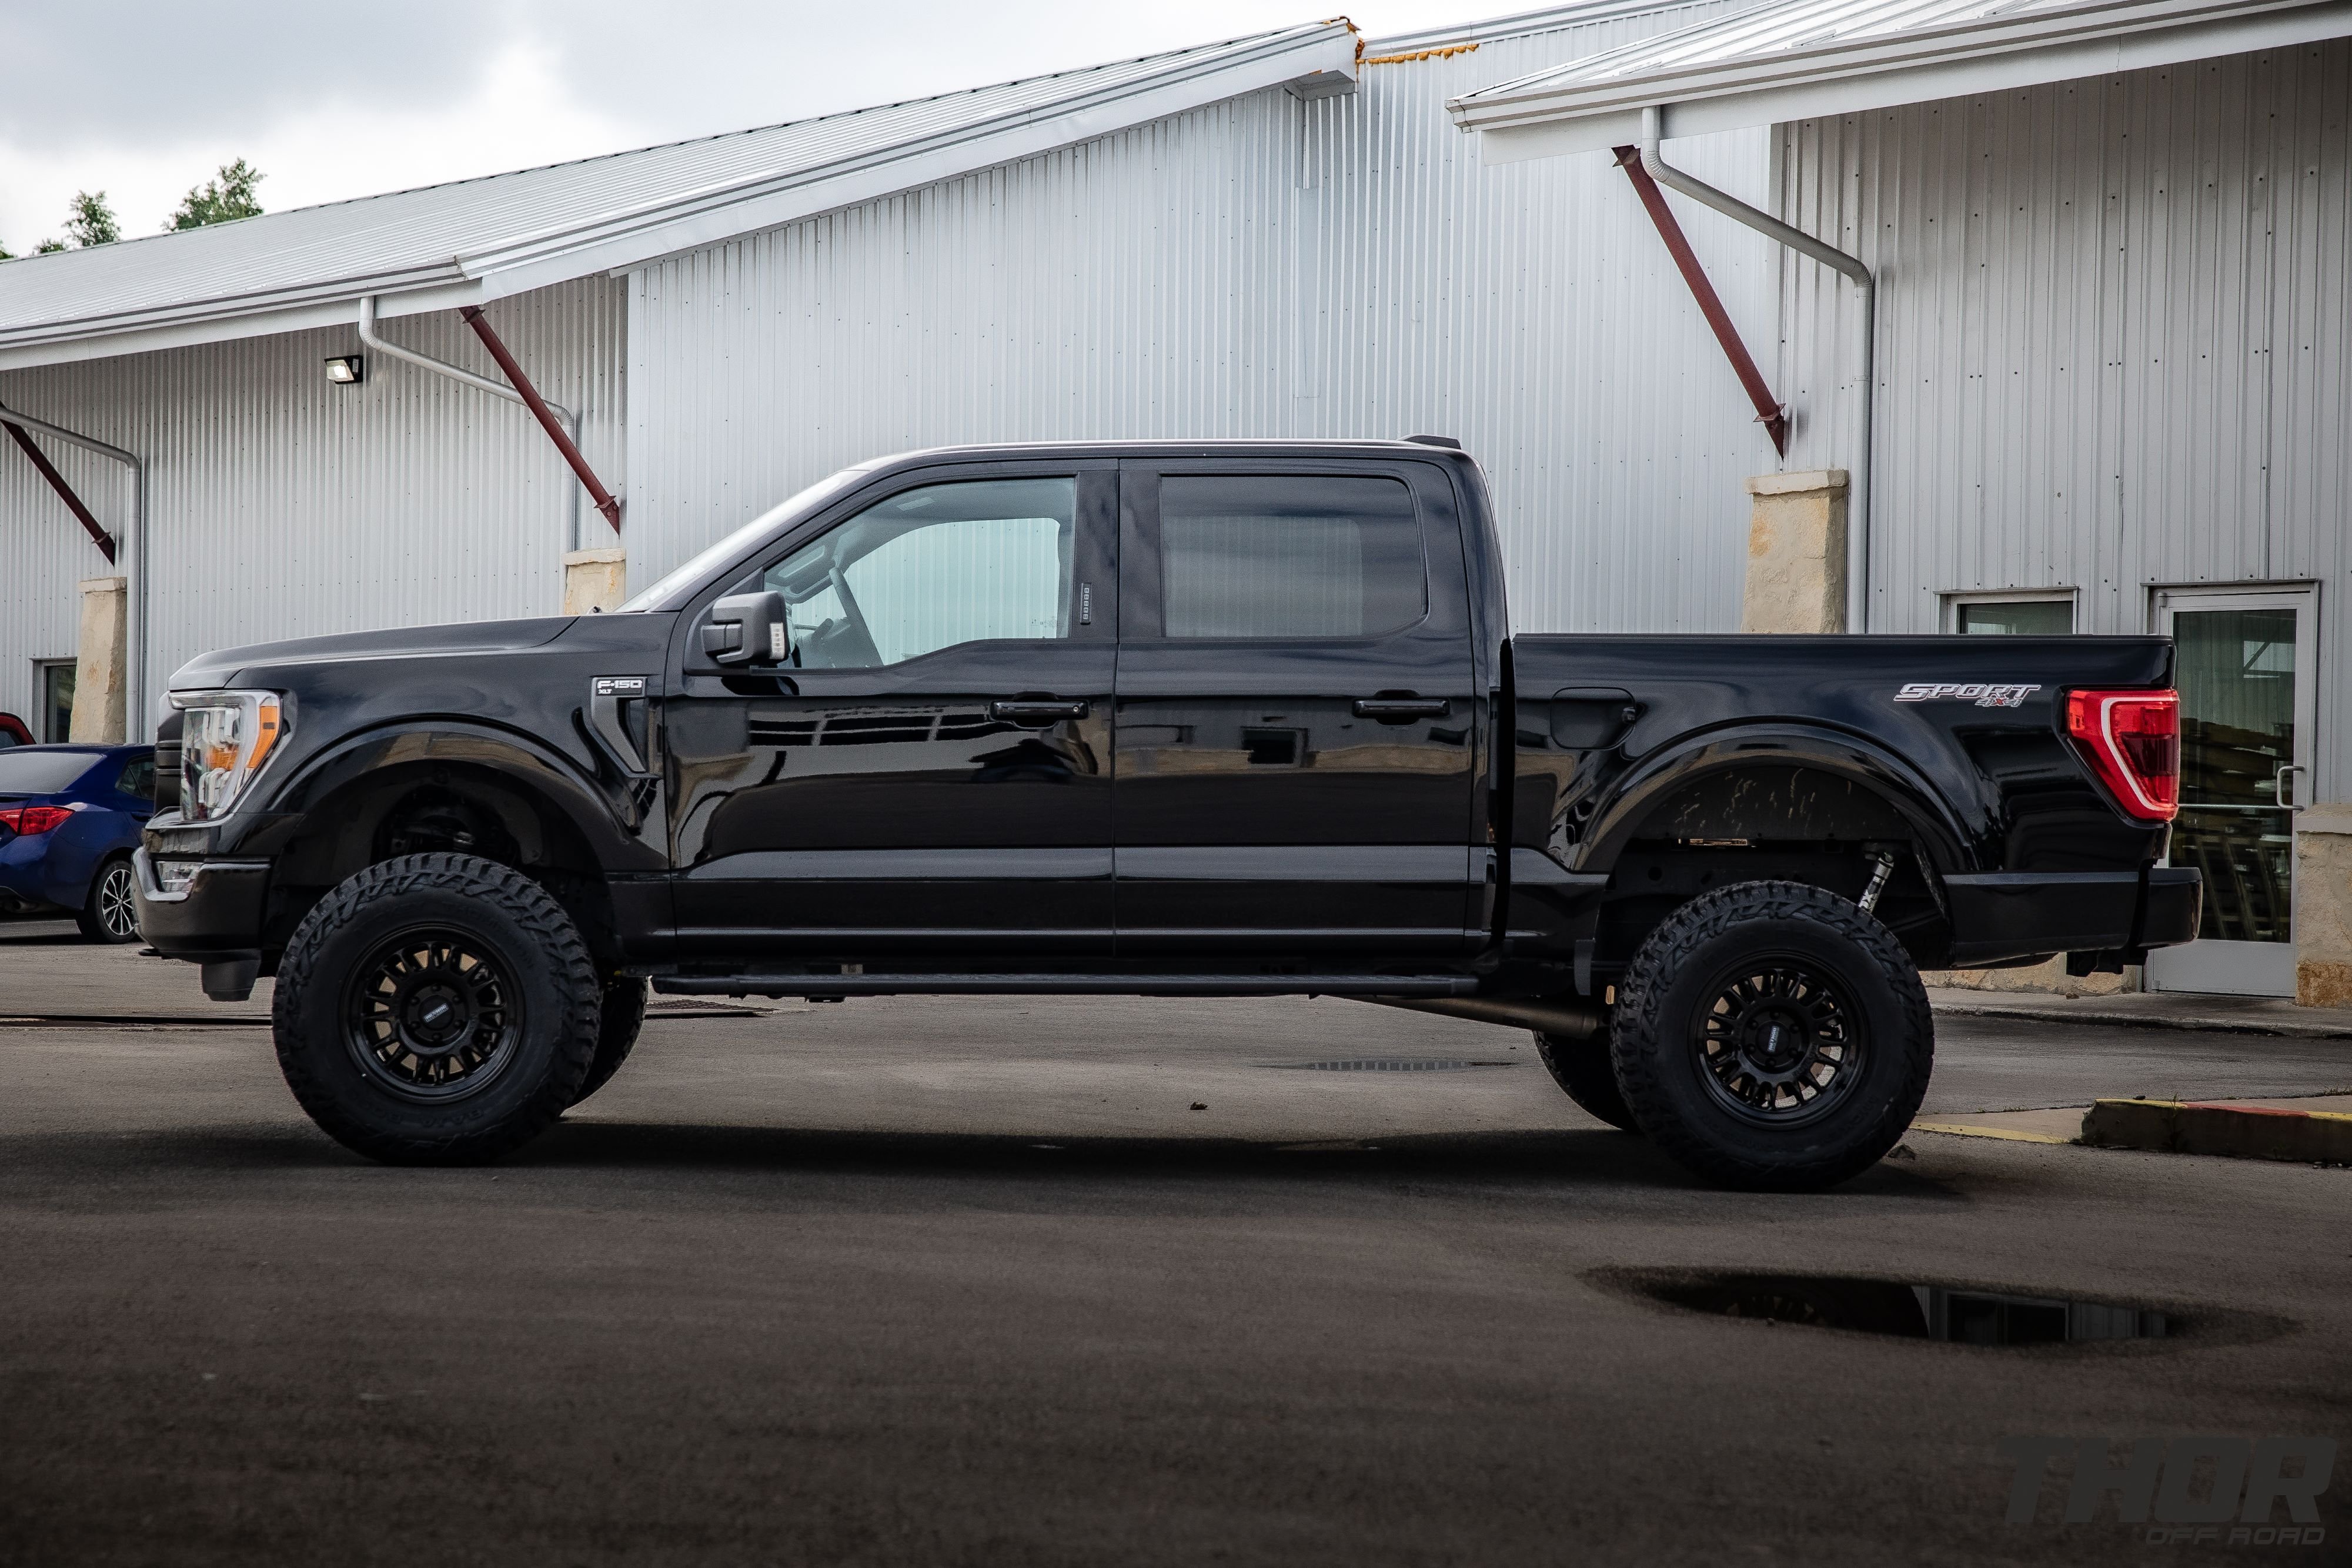 2023 Ford F-150 XLT in Black with BDS 6" Lift Kit, 35x12.50R18 Mickey Thompson Baja Boss AT Tires, Method MR318 18x9" Wheels